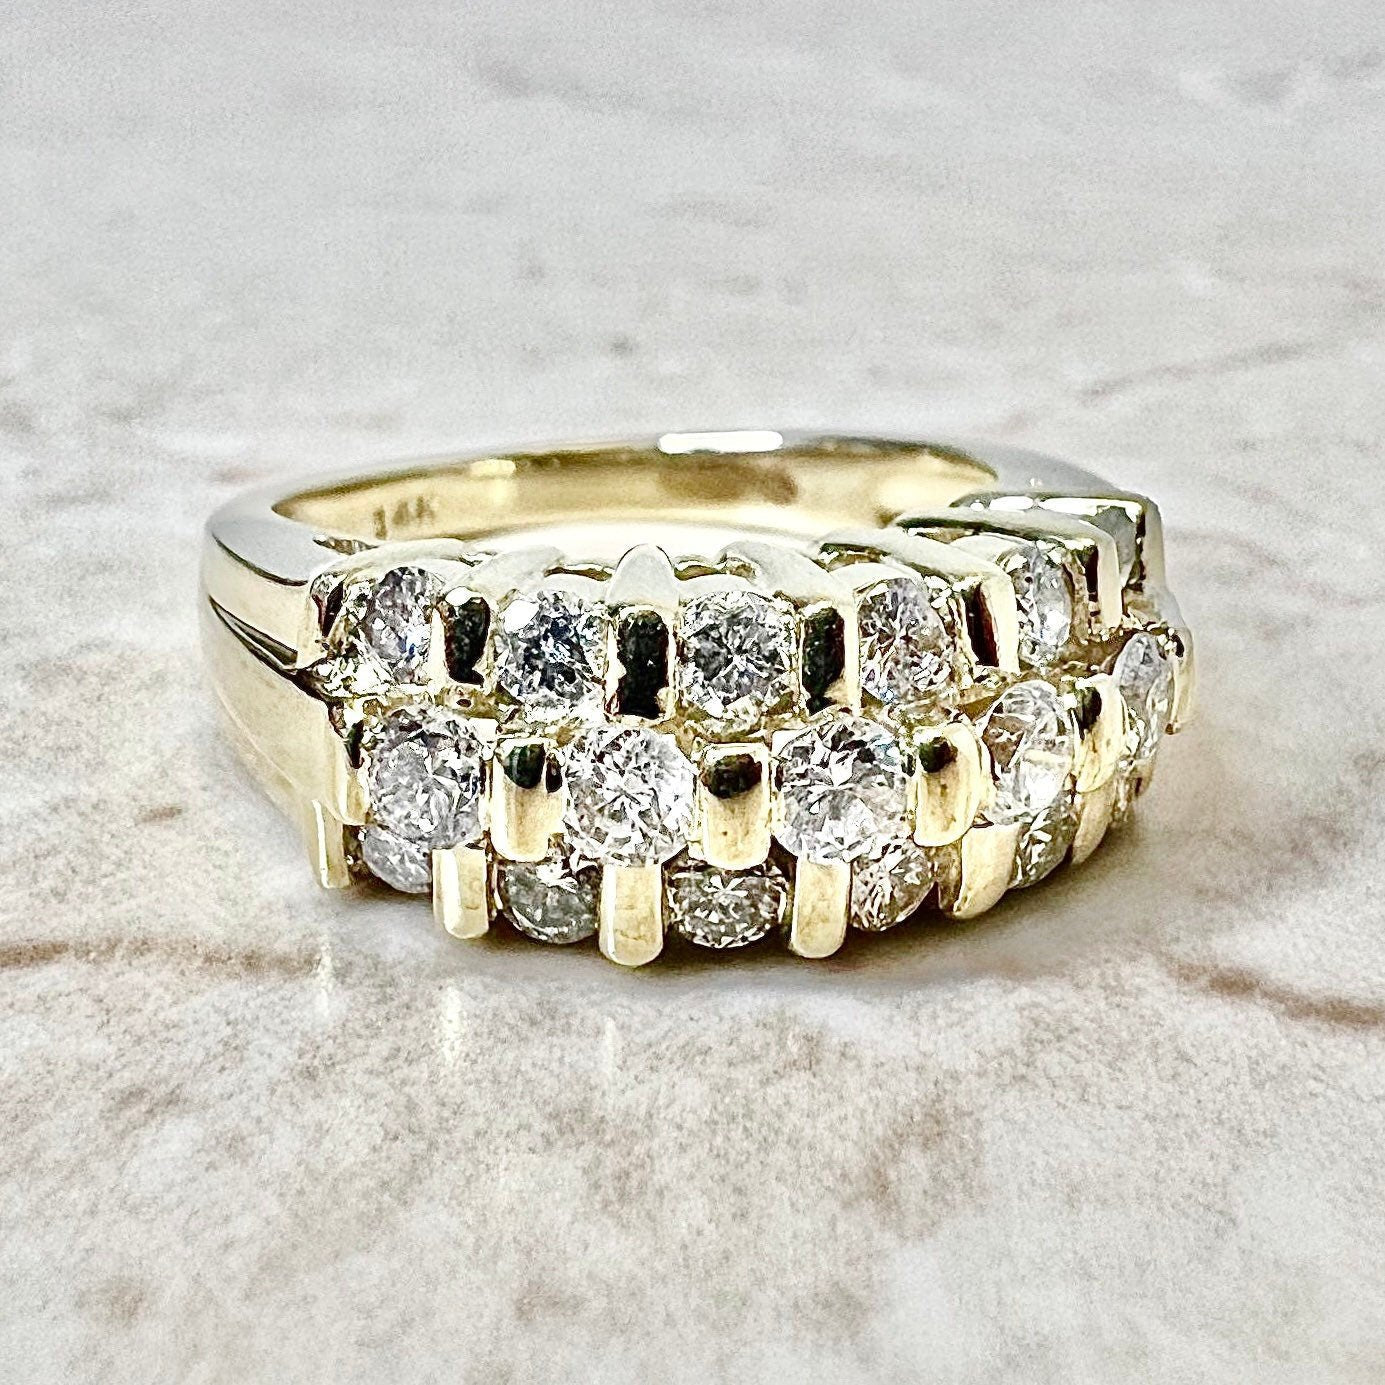 14K Triple Row Diamond Band Ring - Yellow Gold Eternity Ring - Wedding Ring - Bridal Jewelry - Anniversary Ring - Best Gift For Her